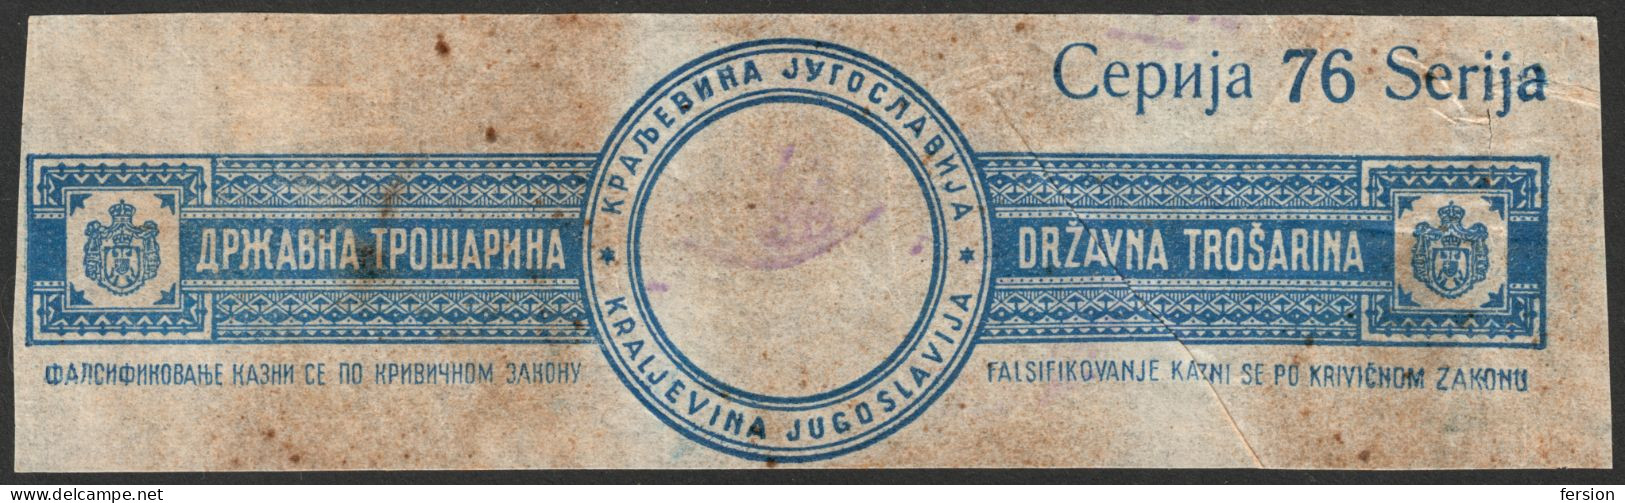 Yugoslavia 1945 EXCISE Revenue Fiscal Luxury Tax CONTROL BAND Stamp / Stripe Seal - Ser. No. 76 - Coat Of Arms - Service